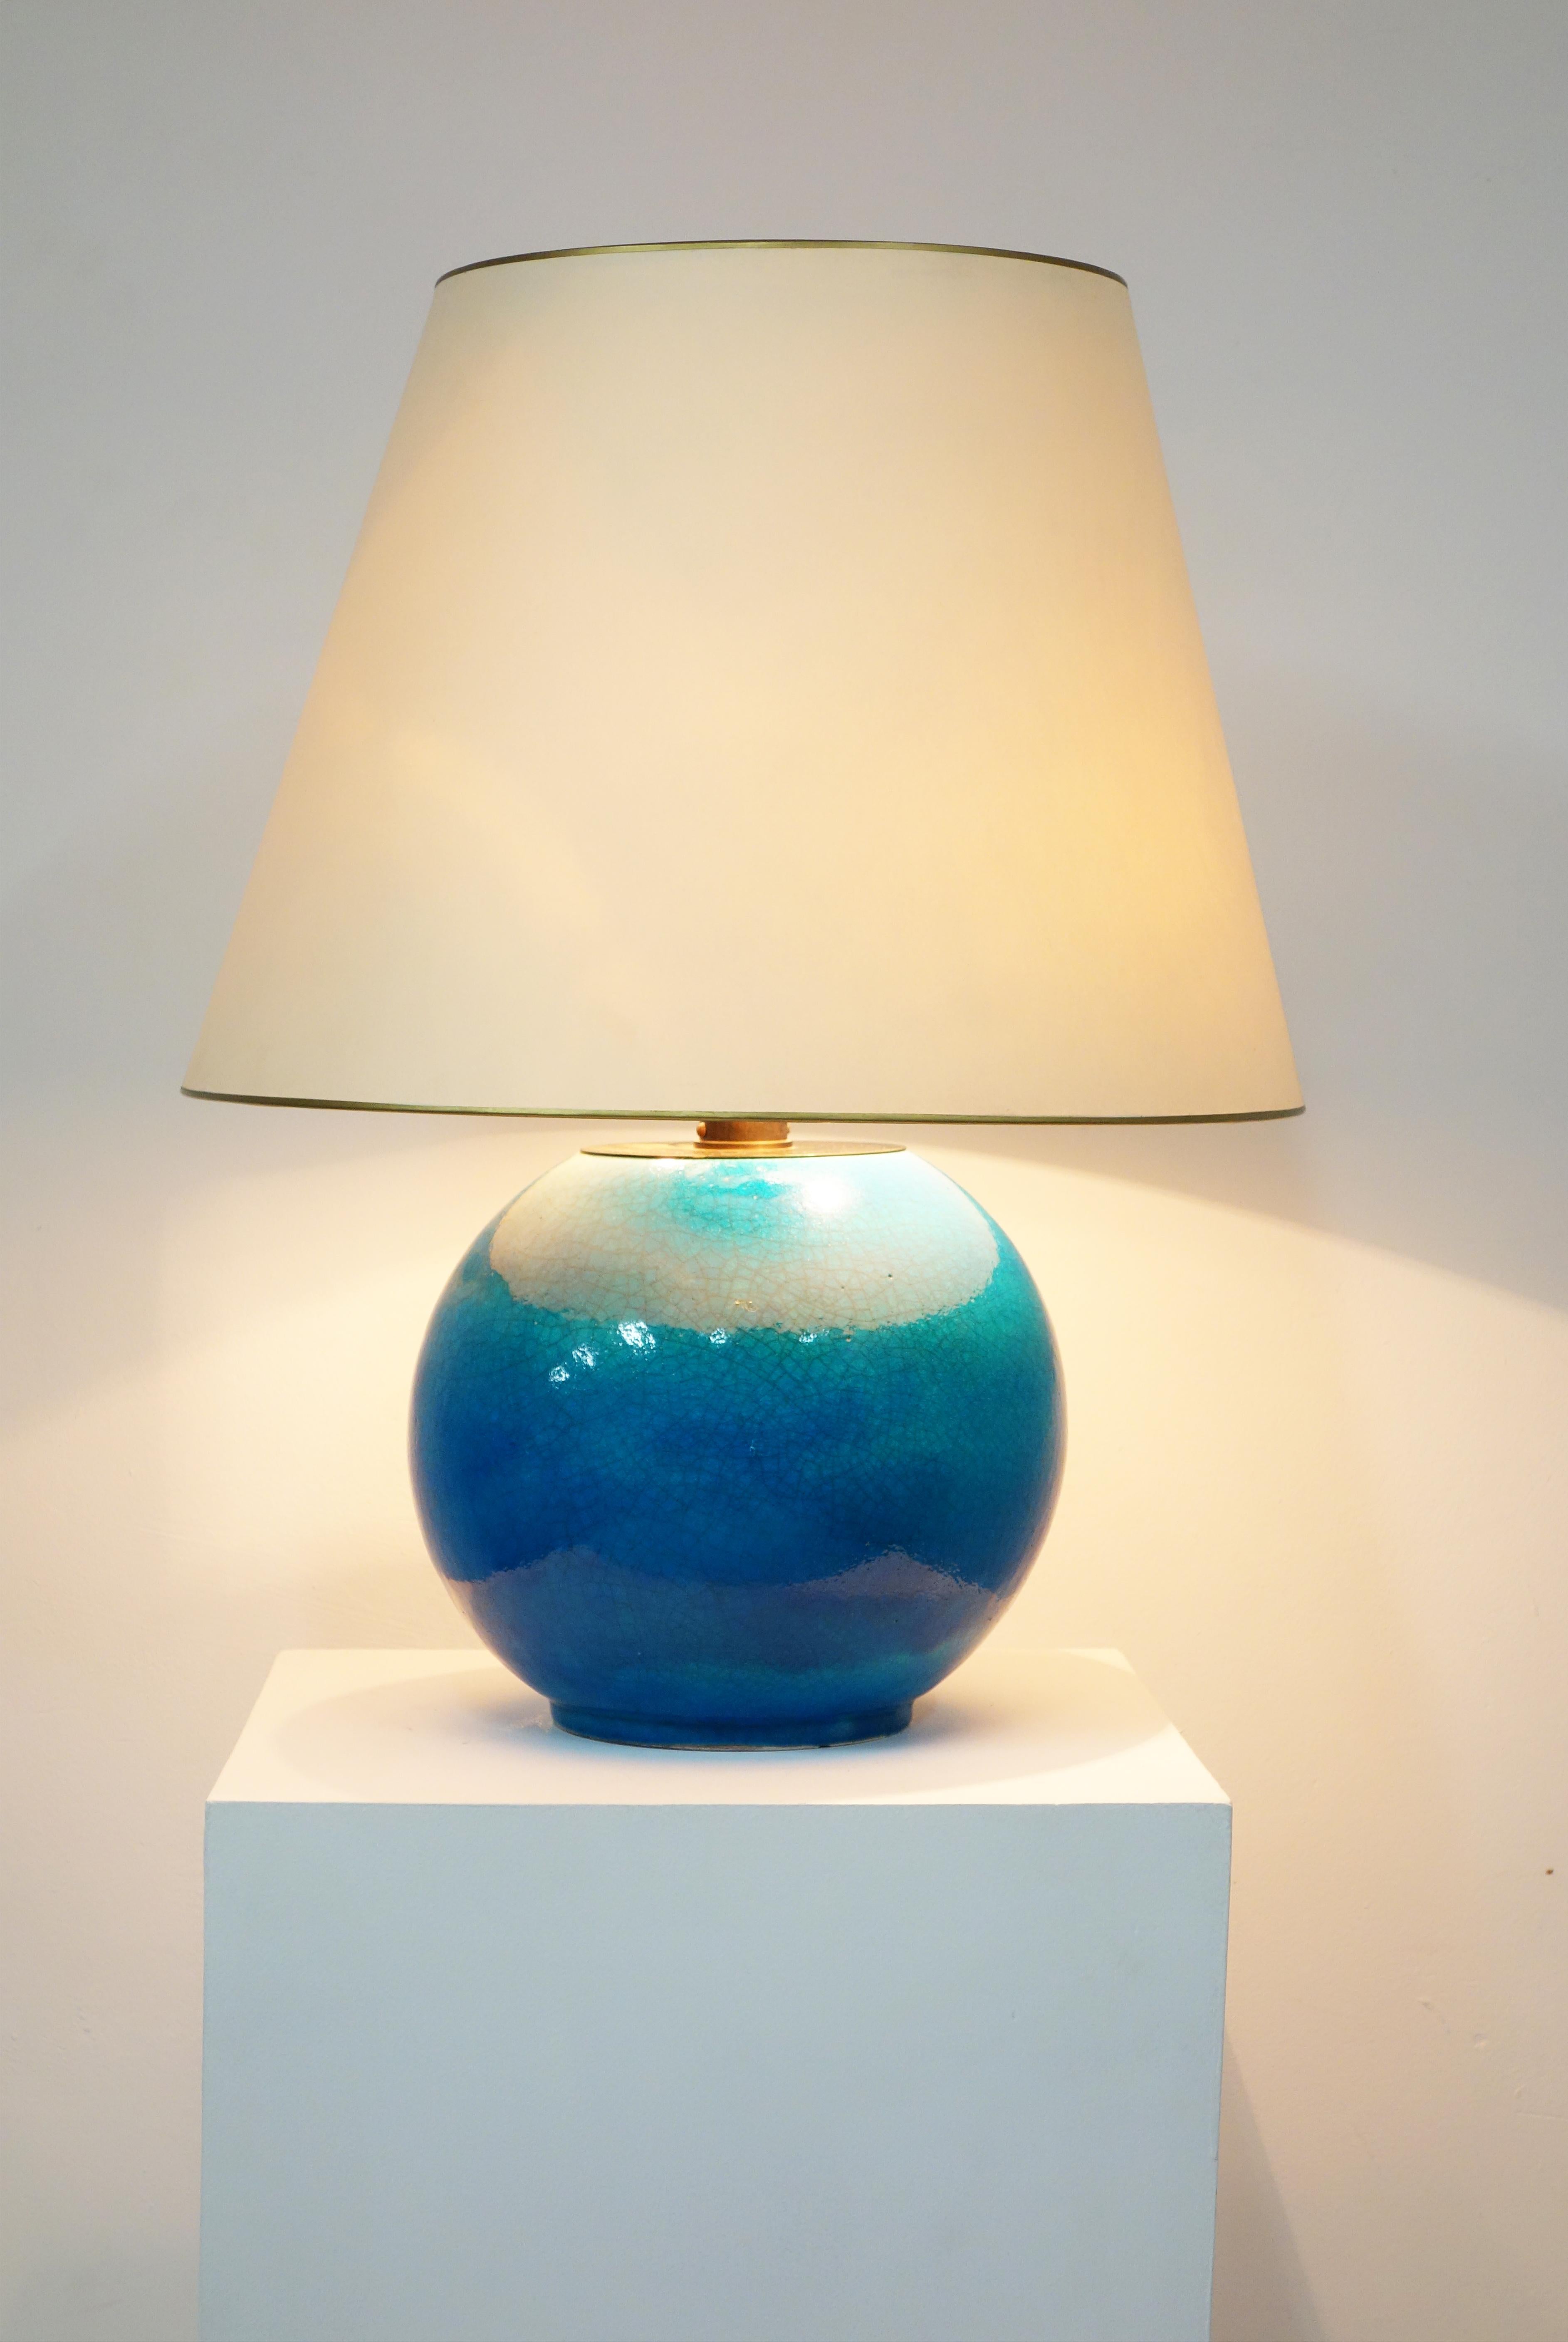 Blue crazed ceramic table lamp by Jean Besnard, circa 1930.
Important round lamp in blue crazed enameled ceramic. A glass white bowl supports the light shade.
The color is very beautiful: cloudy blue with shades.
Signed ‘JB FRANCE’ under the